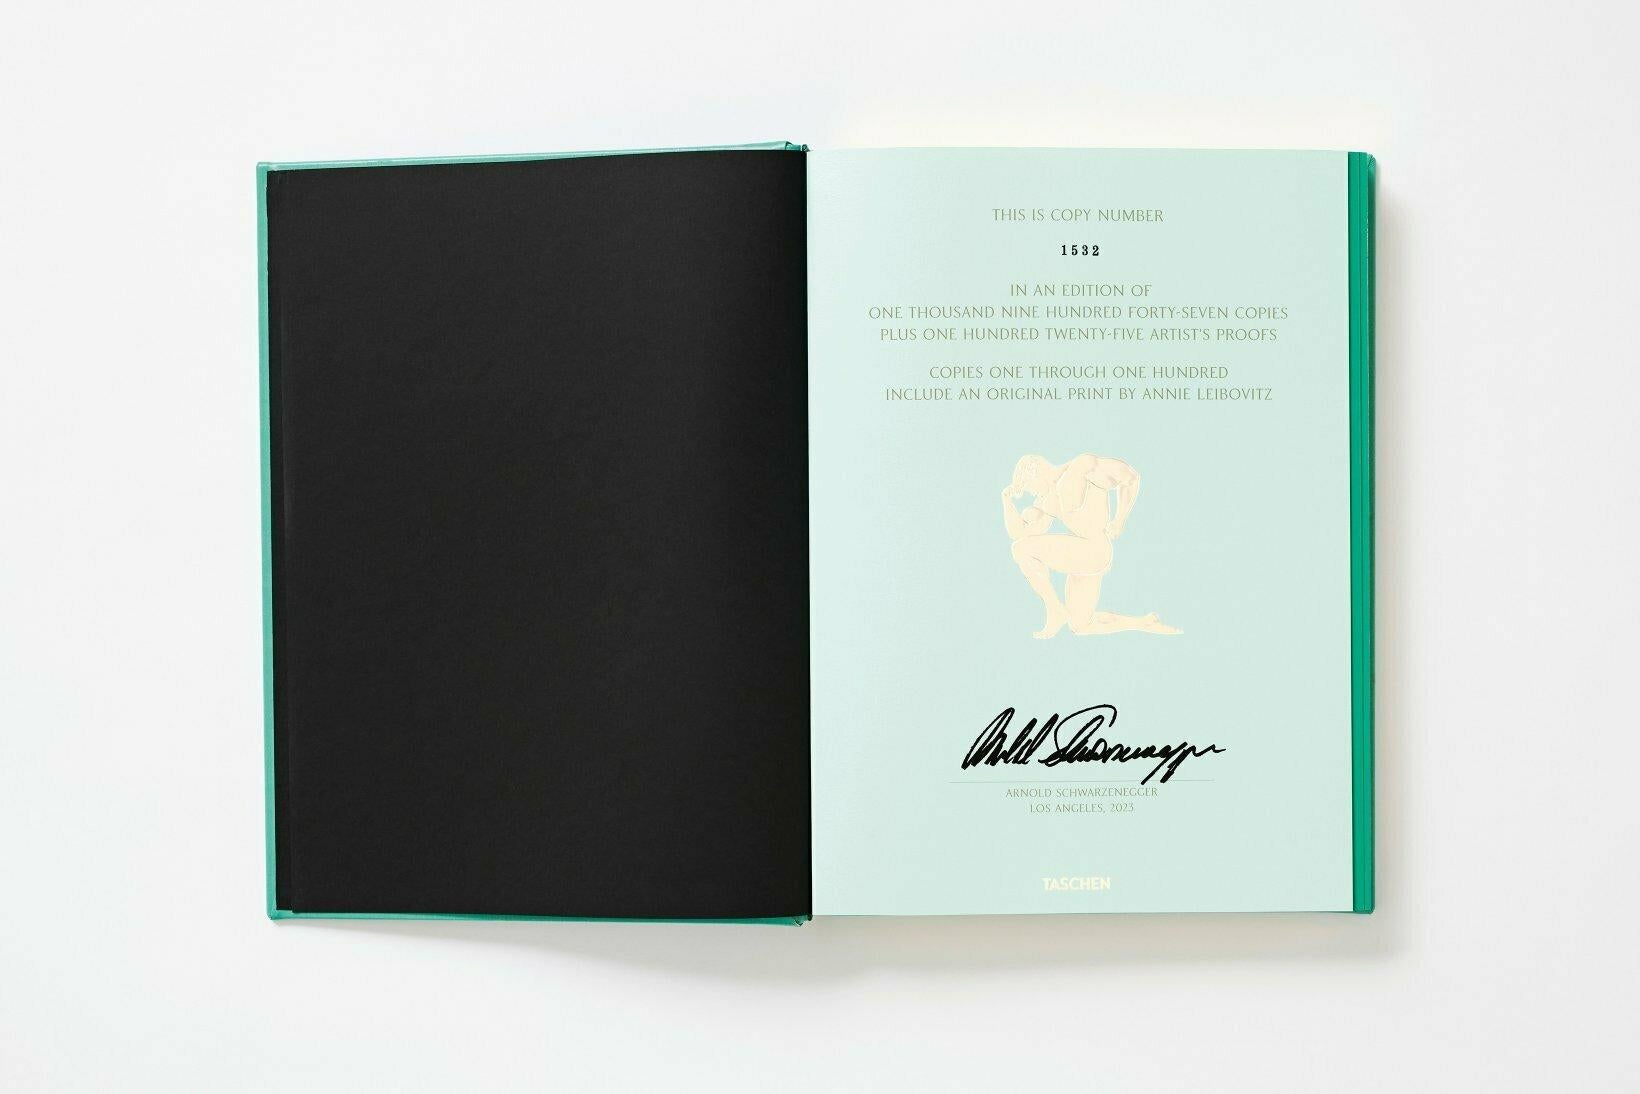 Faux Leather Arnold Schwarzenegger, Signed Limited Edition Book with Capitello Bookstand For Sale